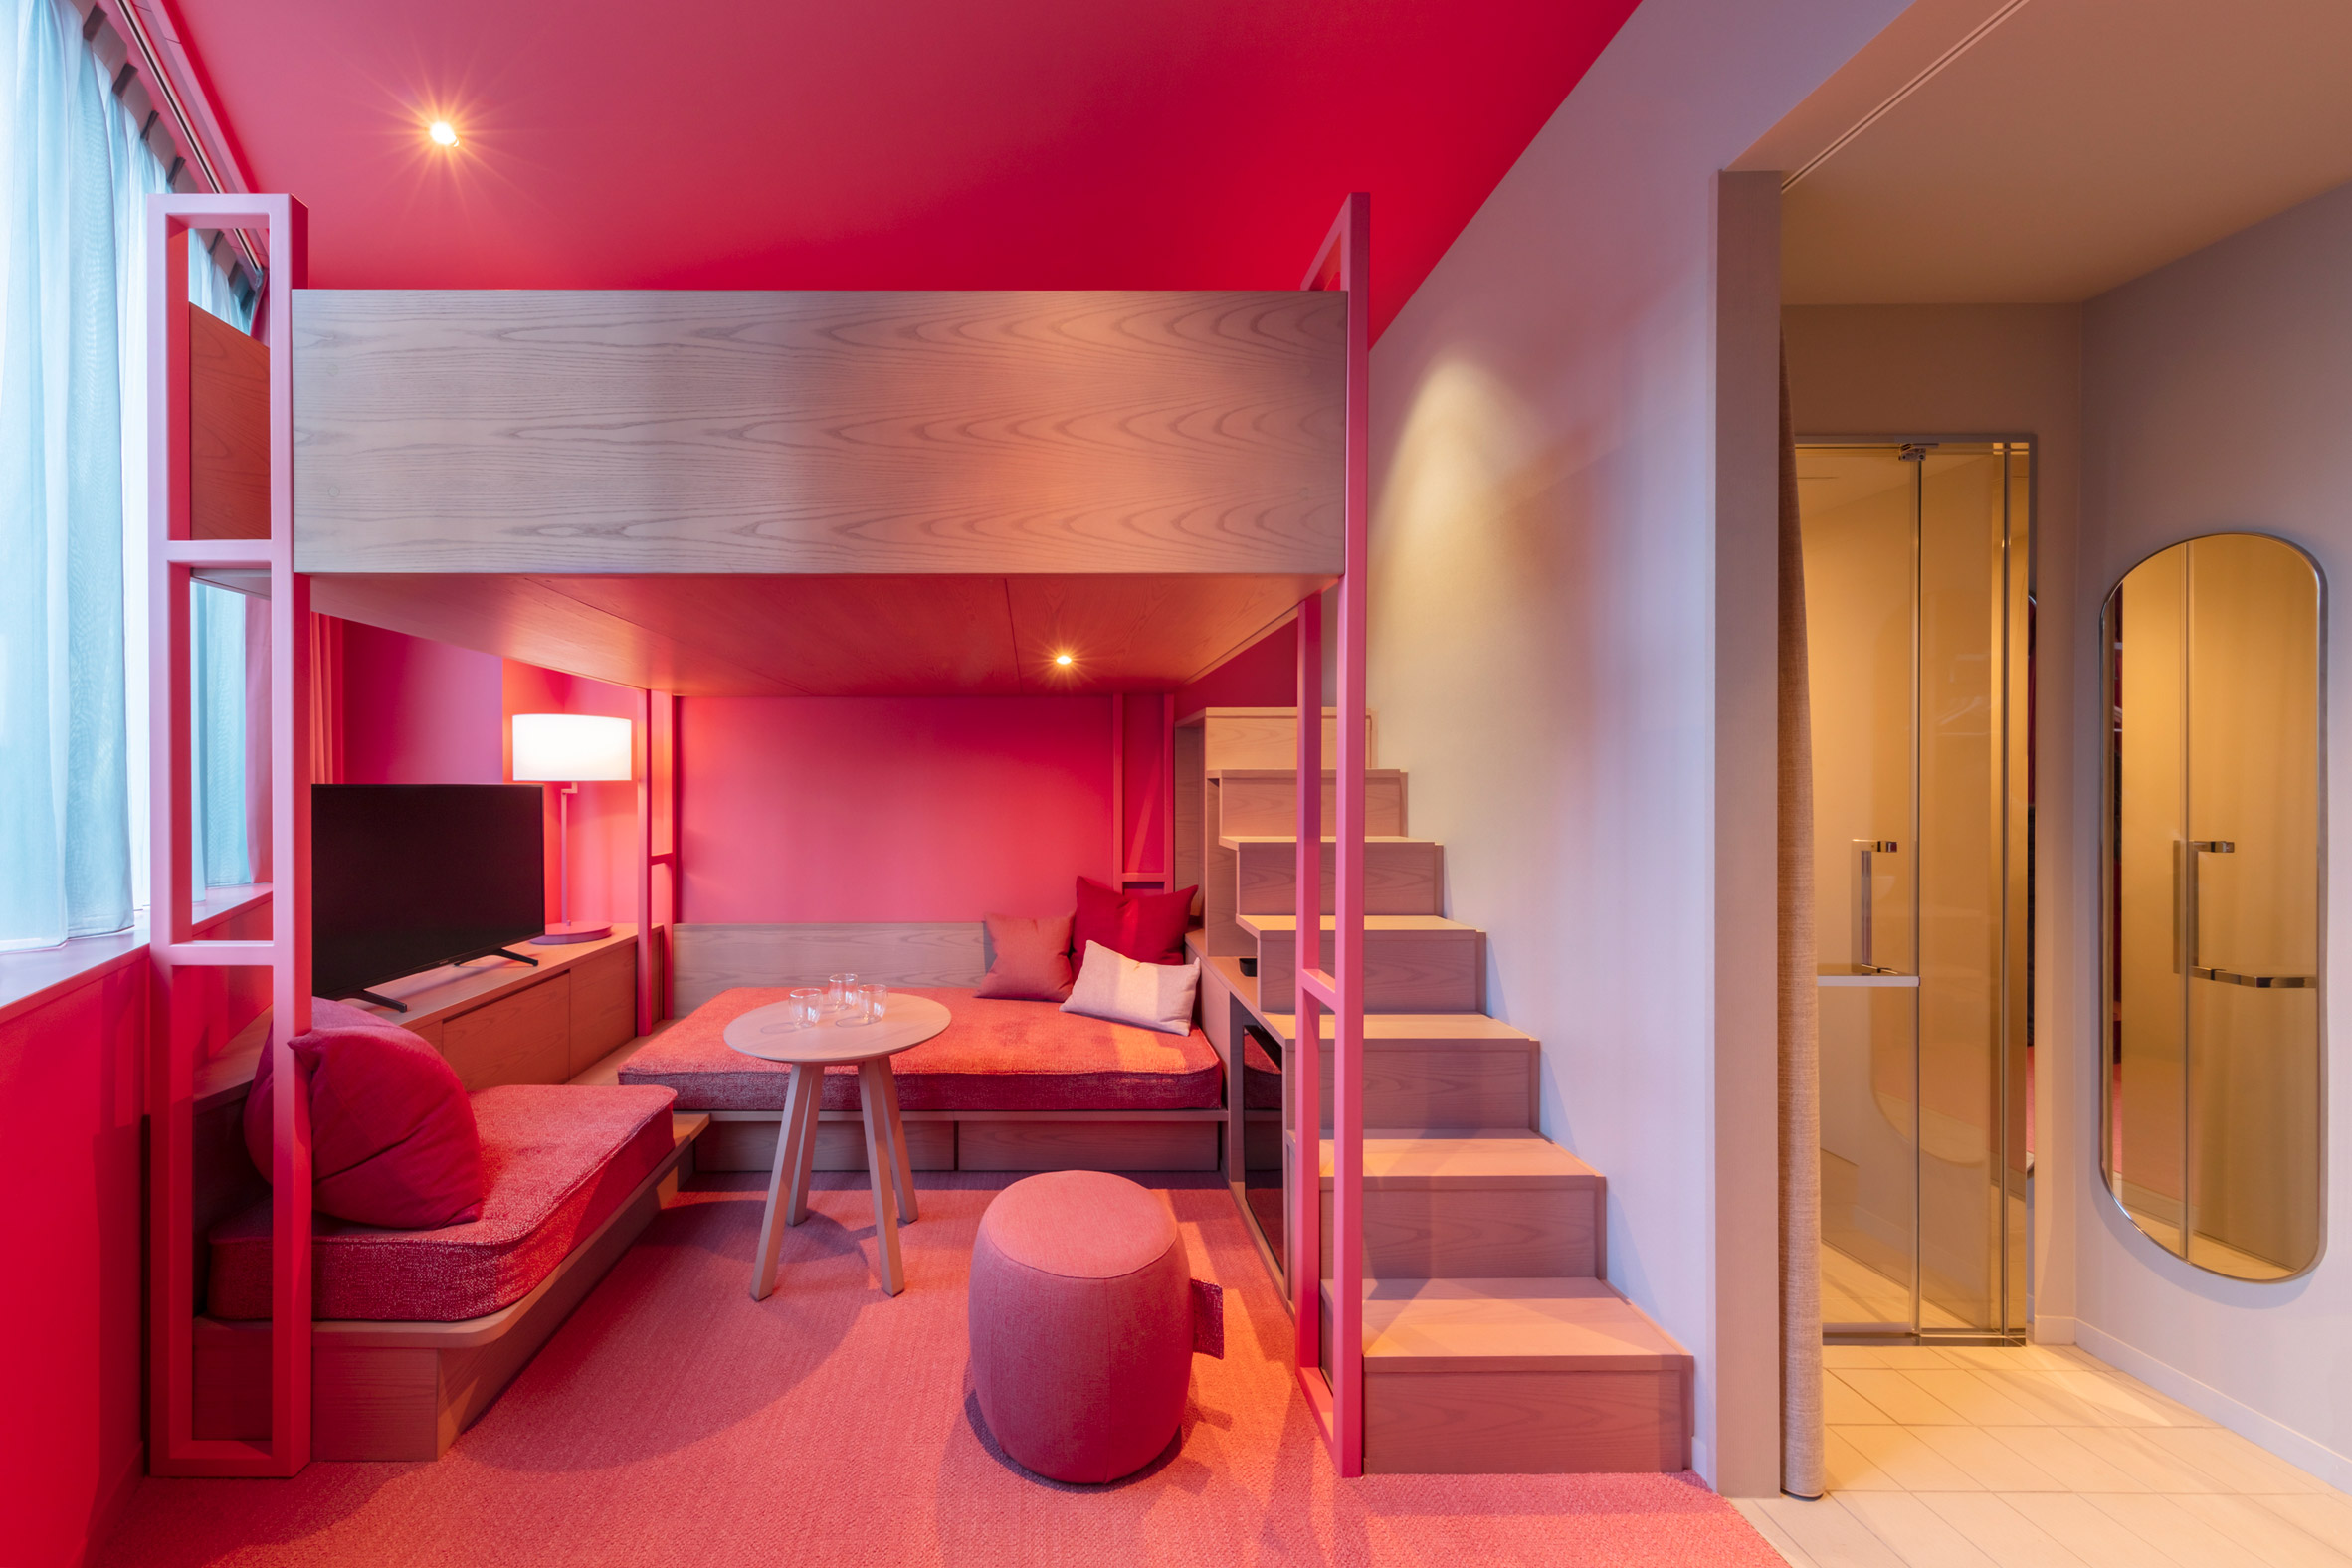 Colourful two-tone bedrooms